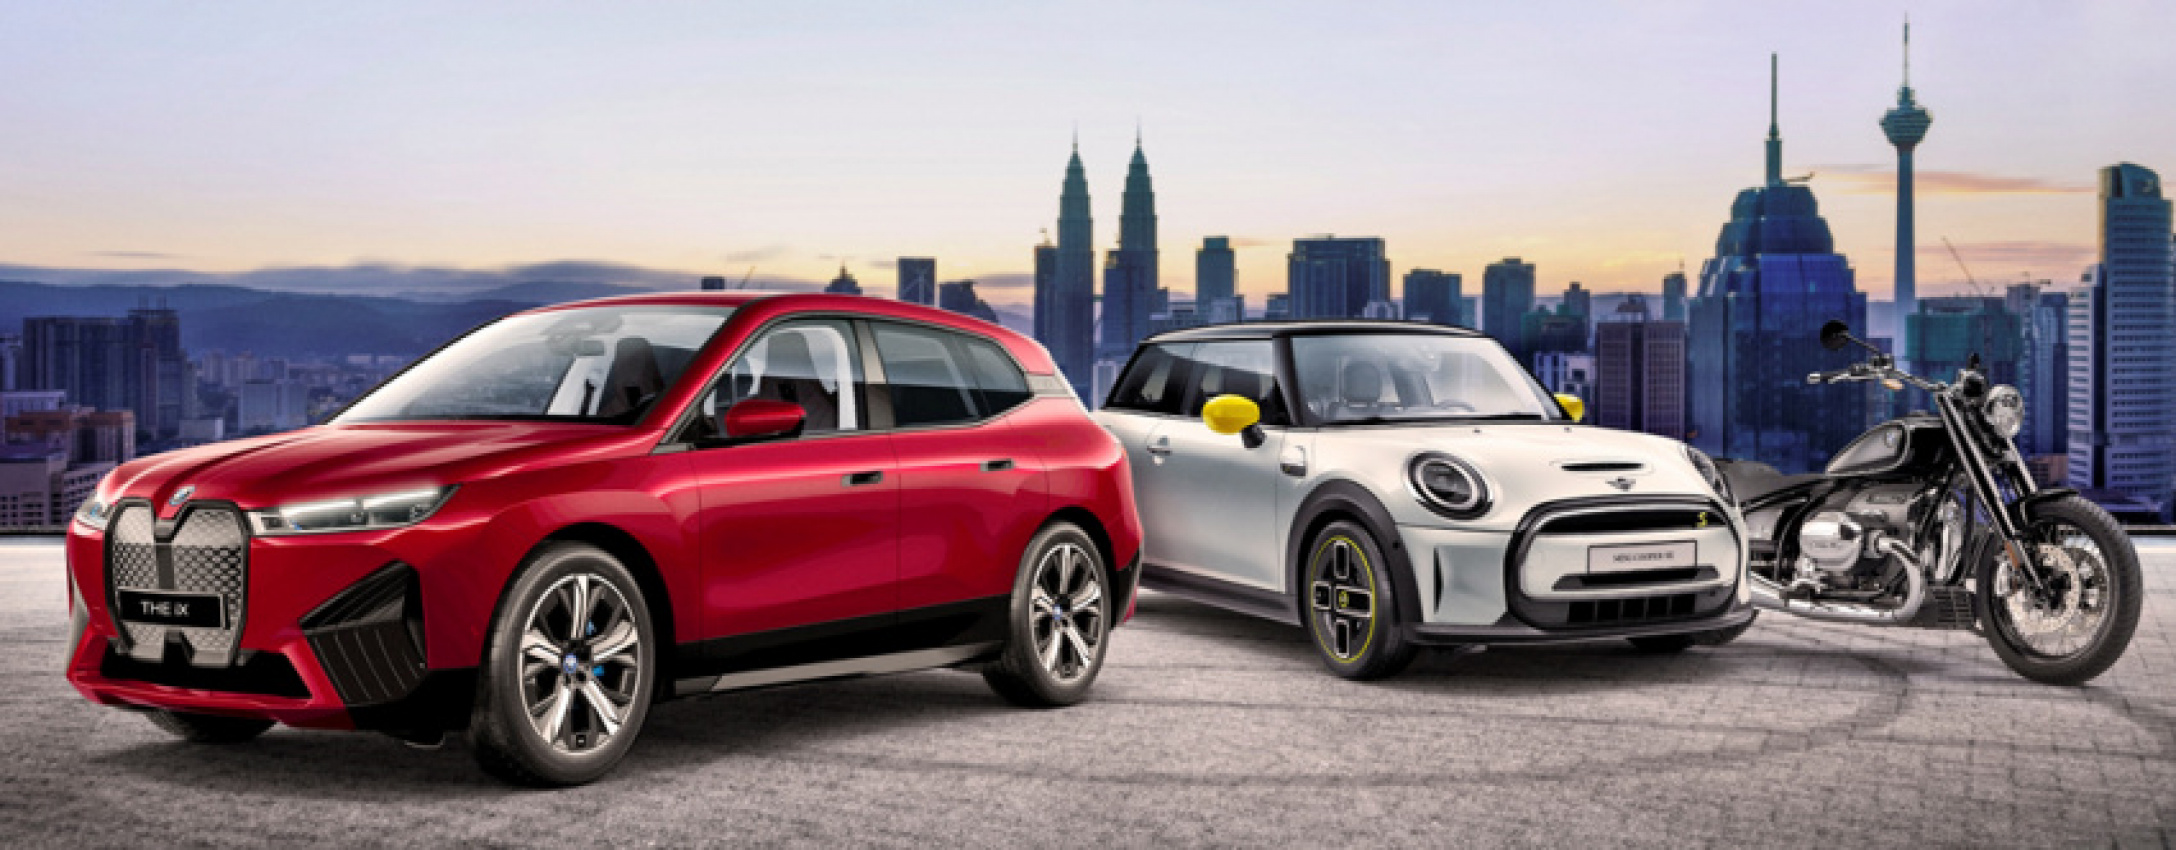 autos, bmw, cars, bmw group malaysia, bmw-sales, electrification, malaysian car sales, mini sales, bmw group malaysia maintained leadership position in premium segment in 2021